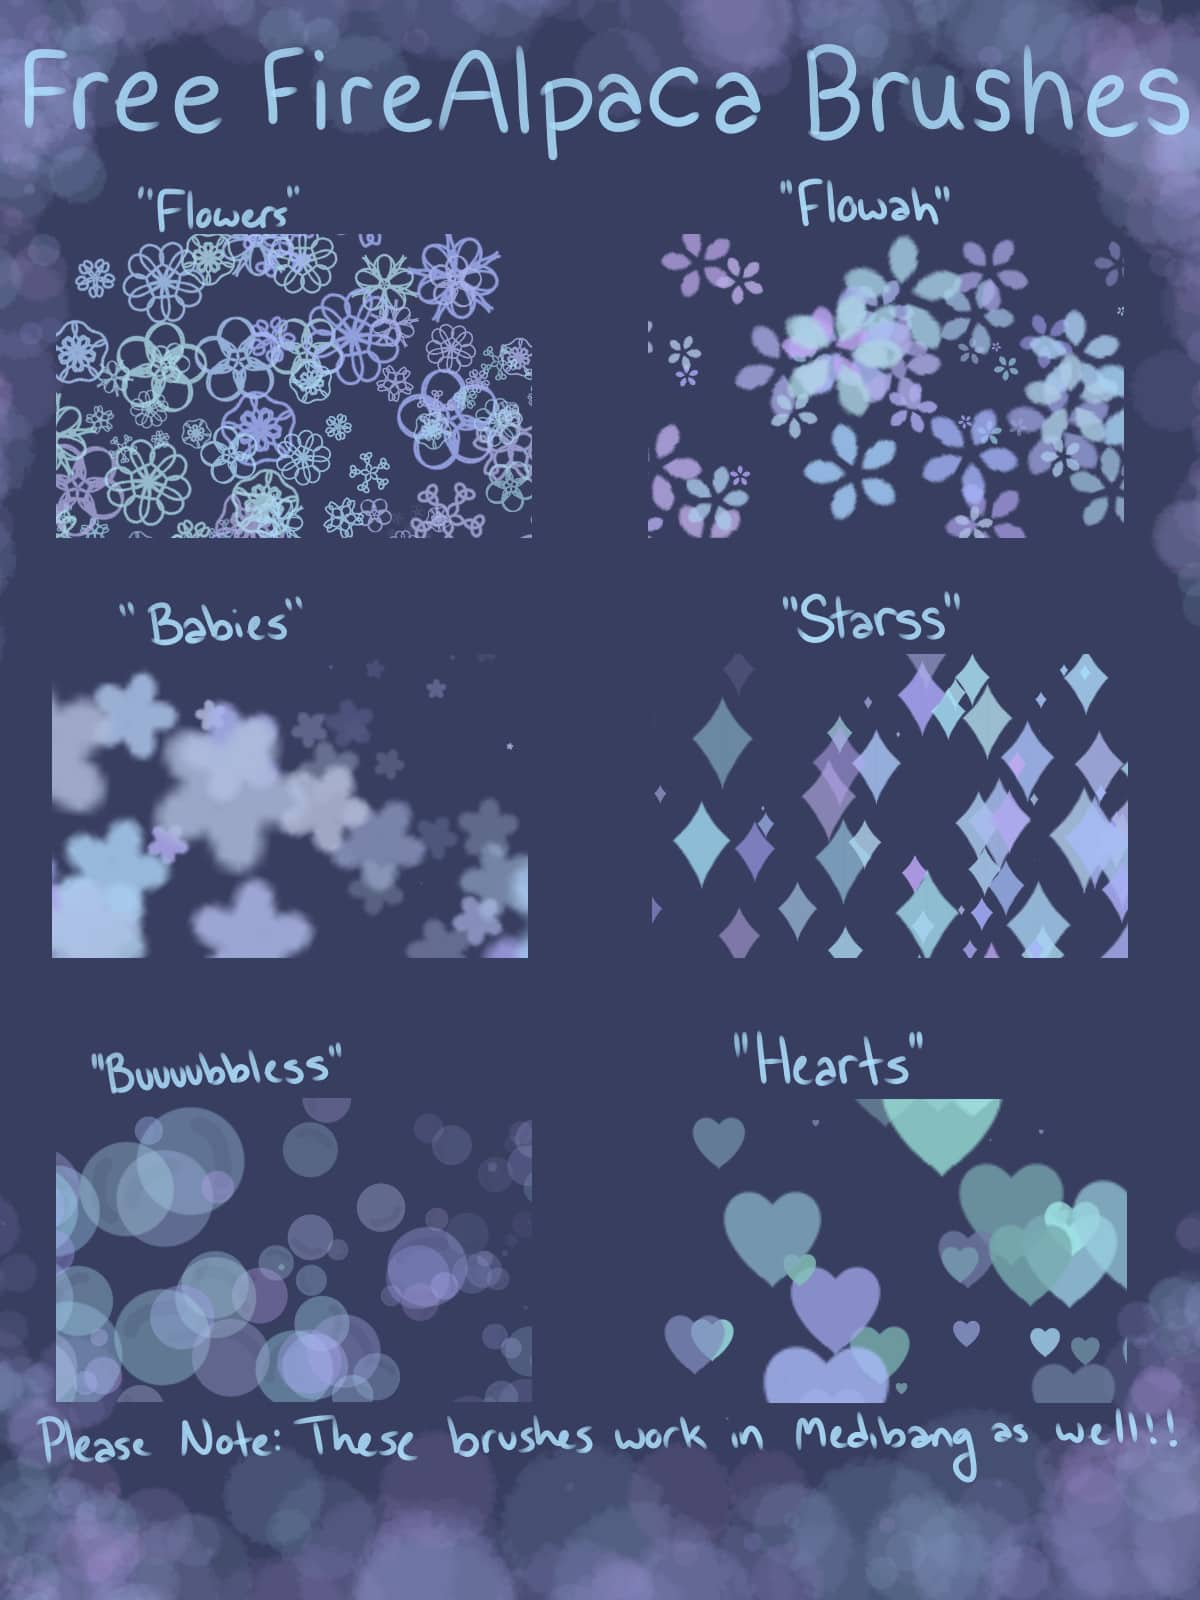 Flowers, Hearts, and Stars